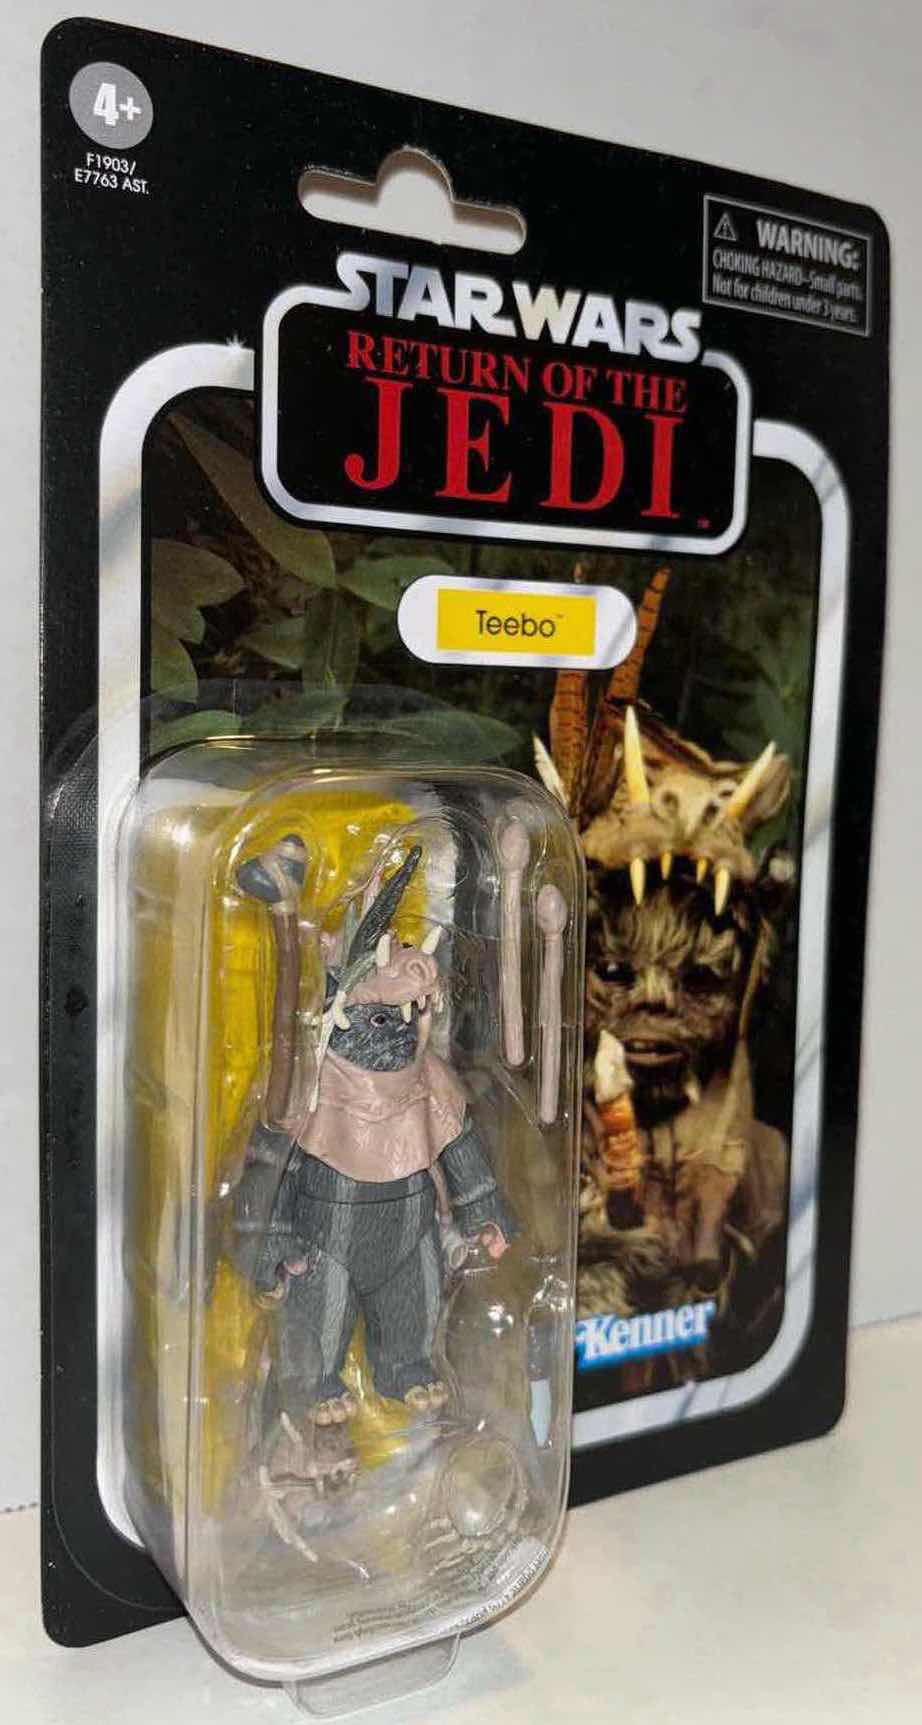 Photo 1 of NEW STAR WARS RETURN OF THE JEDI 3.75” THE VINTAGE COLLECTION ACTION FIGURE & ACCESSORIES, “TEEBO” (1)